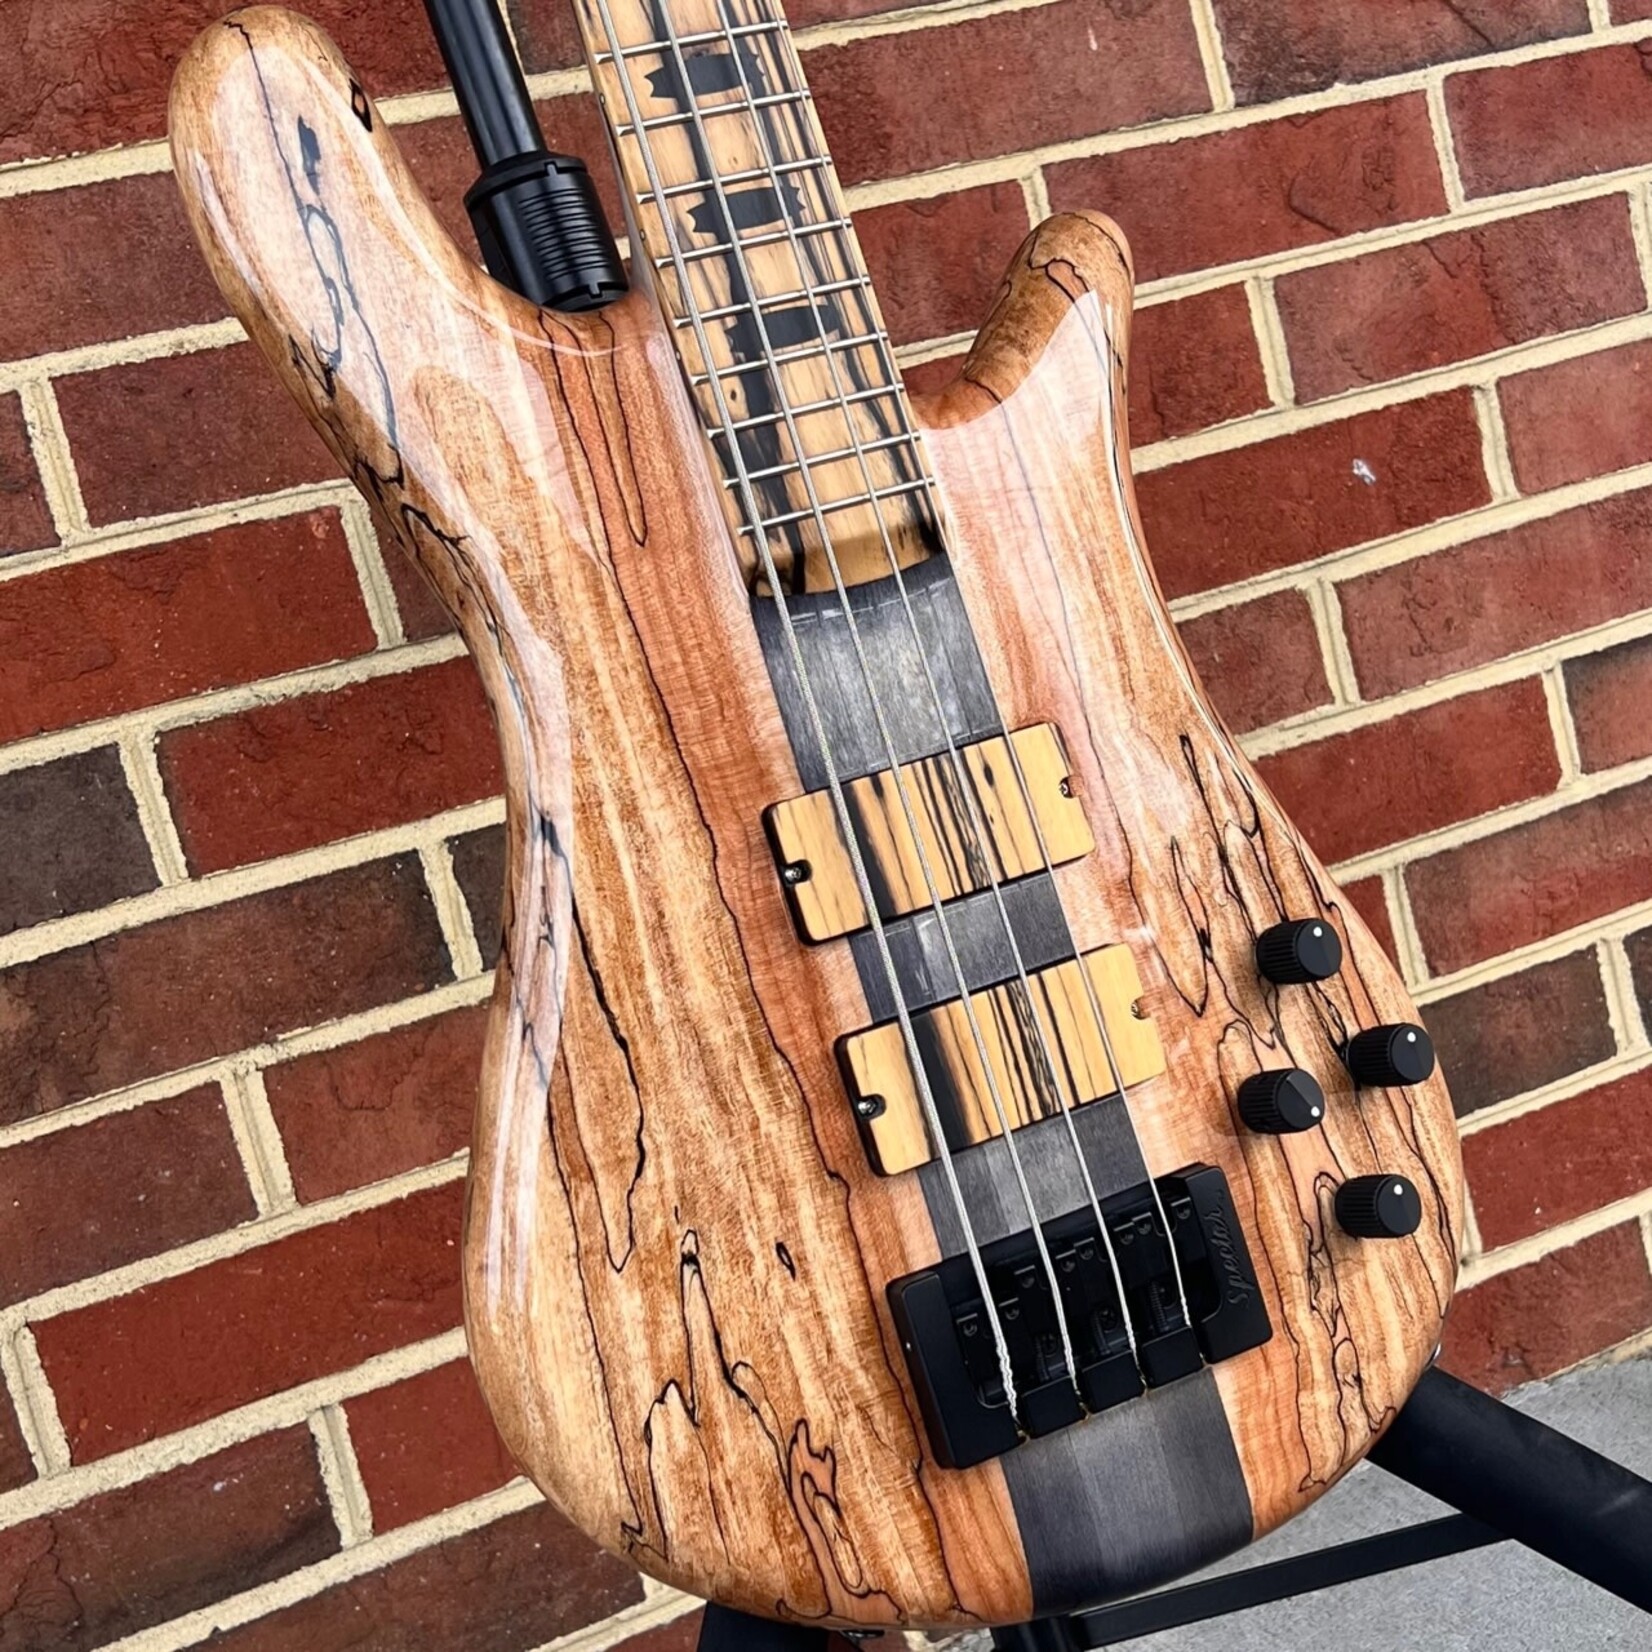 Spector Spector USA NS-2, The Music Loft 30th Anniversary, Spalted Maple Top, Black Walnut Body - Weight Relieved, 3pc Maple Neck, Pale Moon Ebony Fretboard, Ebony Inlays, Bookmatched Spalted Maple Headstock, EMG 35DCX Pickups, HAZ 9v, TSA Case